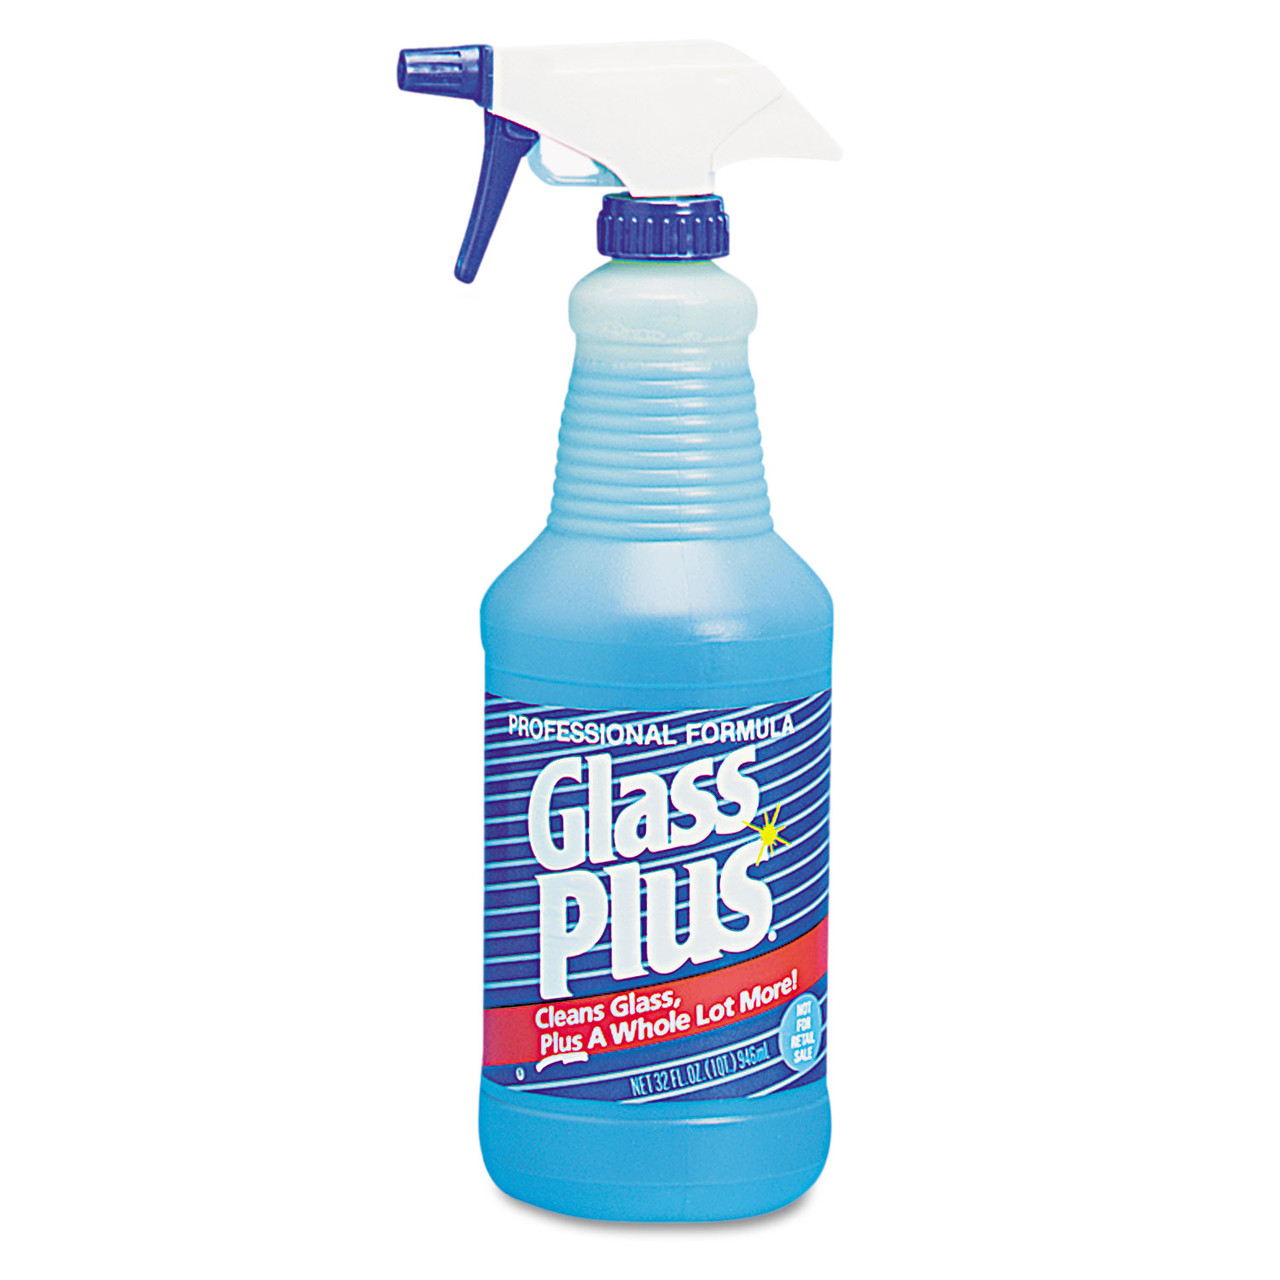 WINDEX Glass & Surface Cleaner 32oz (12/Case)